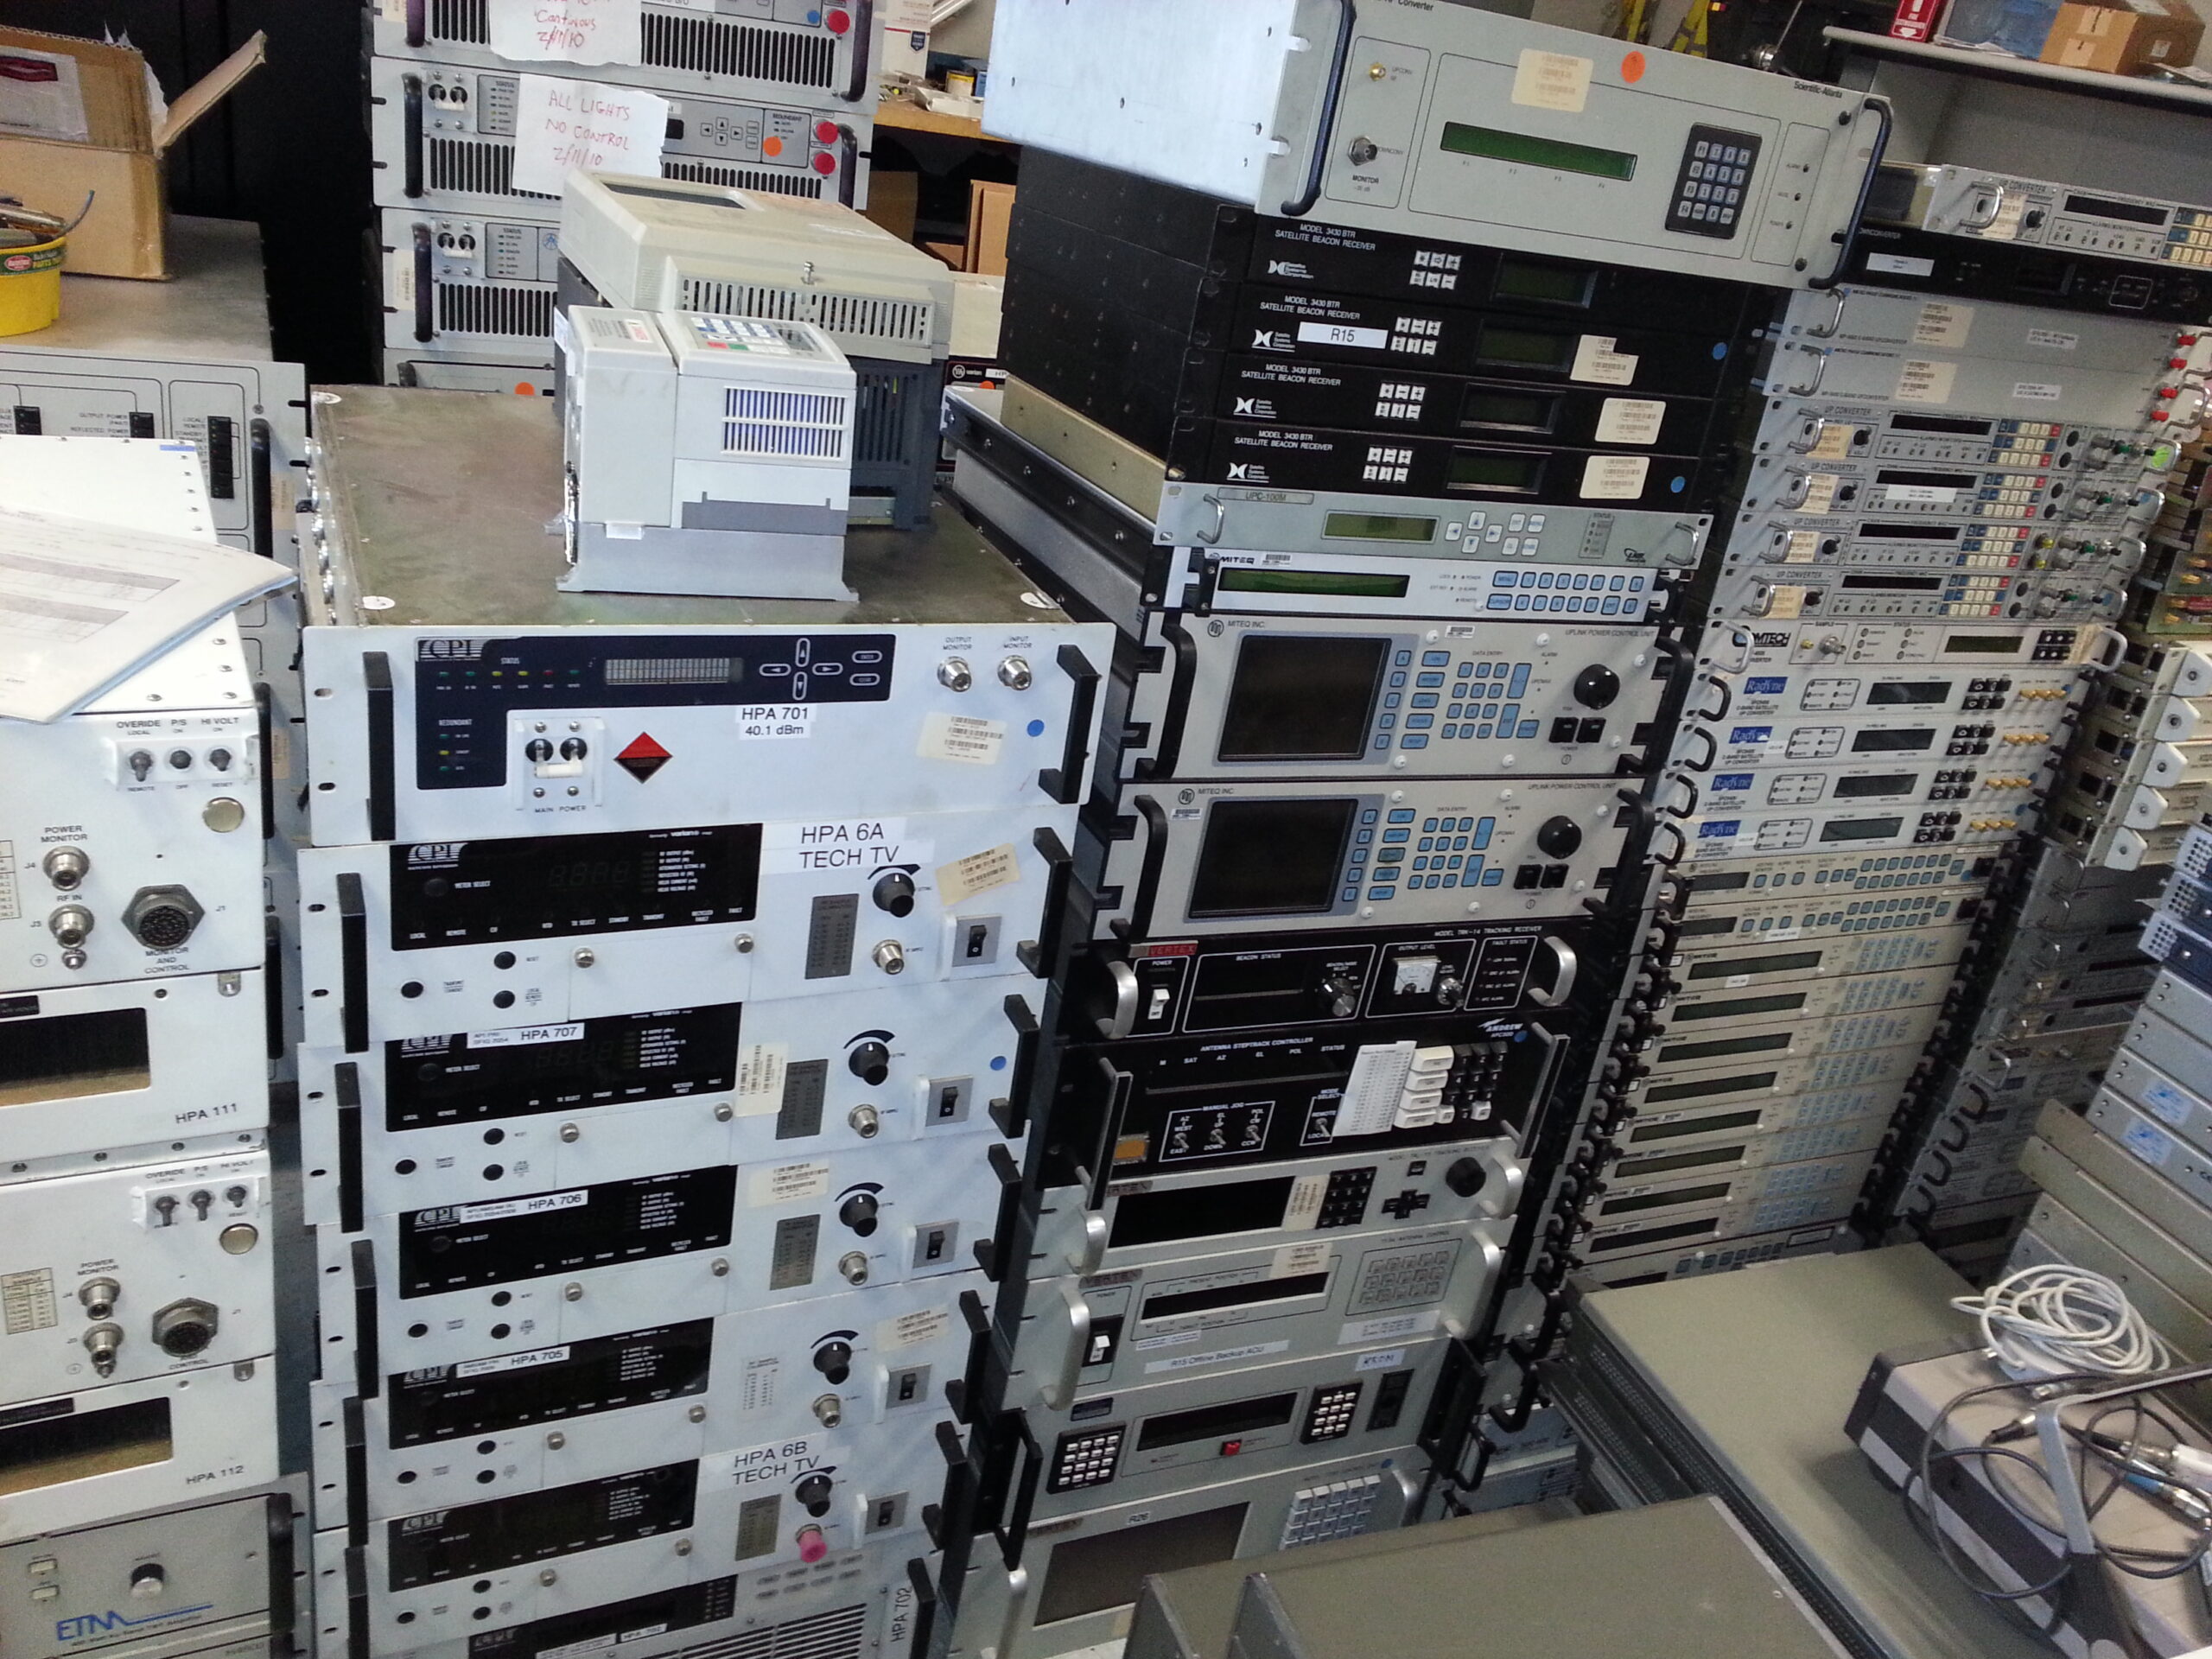 New and used satellite equipment for sale, over 6 million dollars’ worth of equipment.